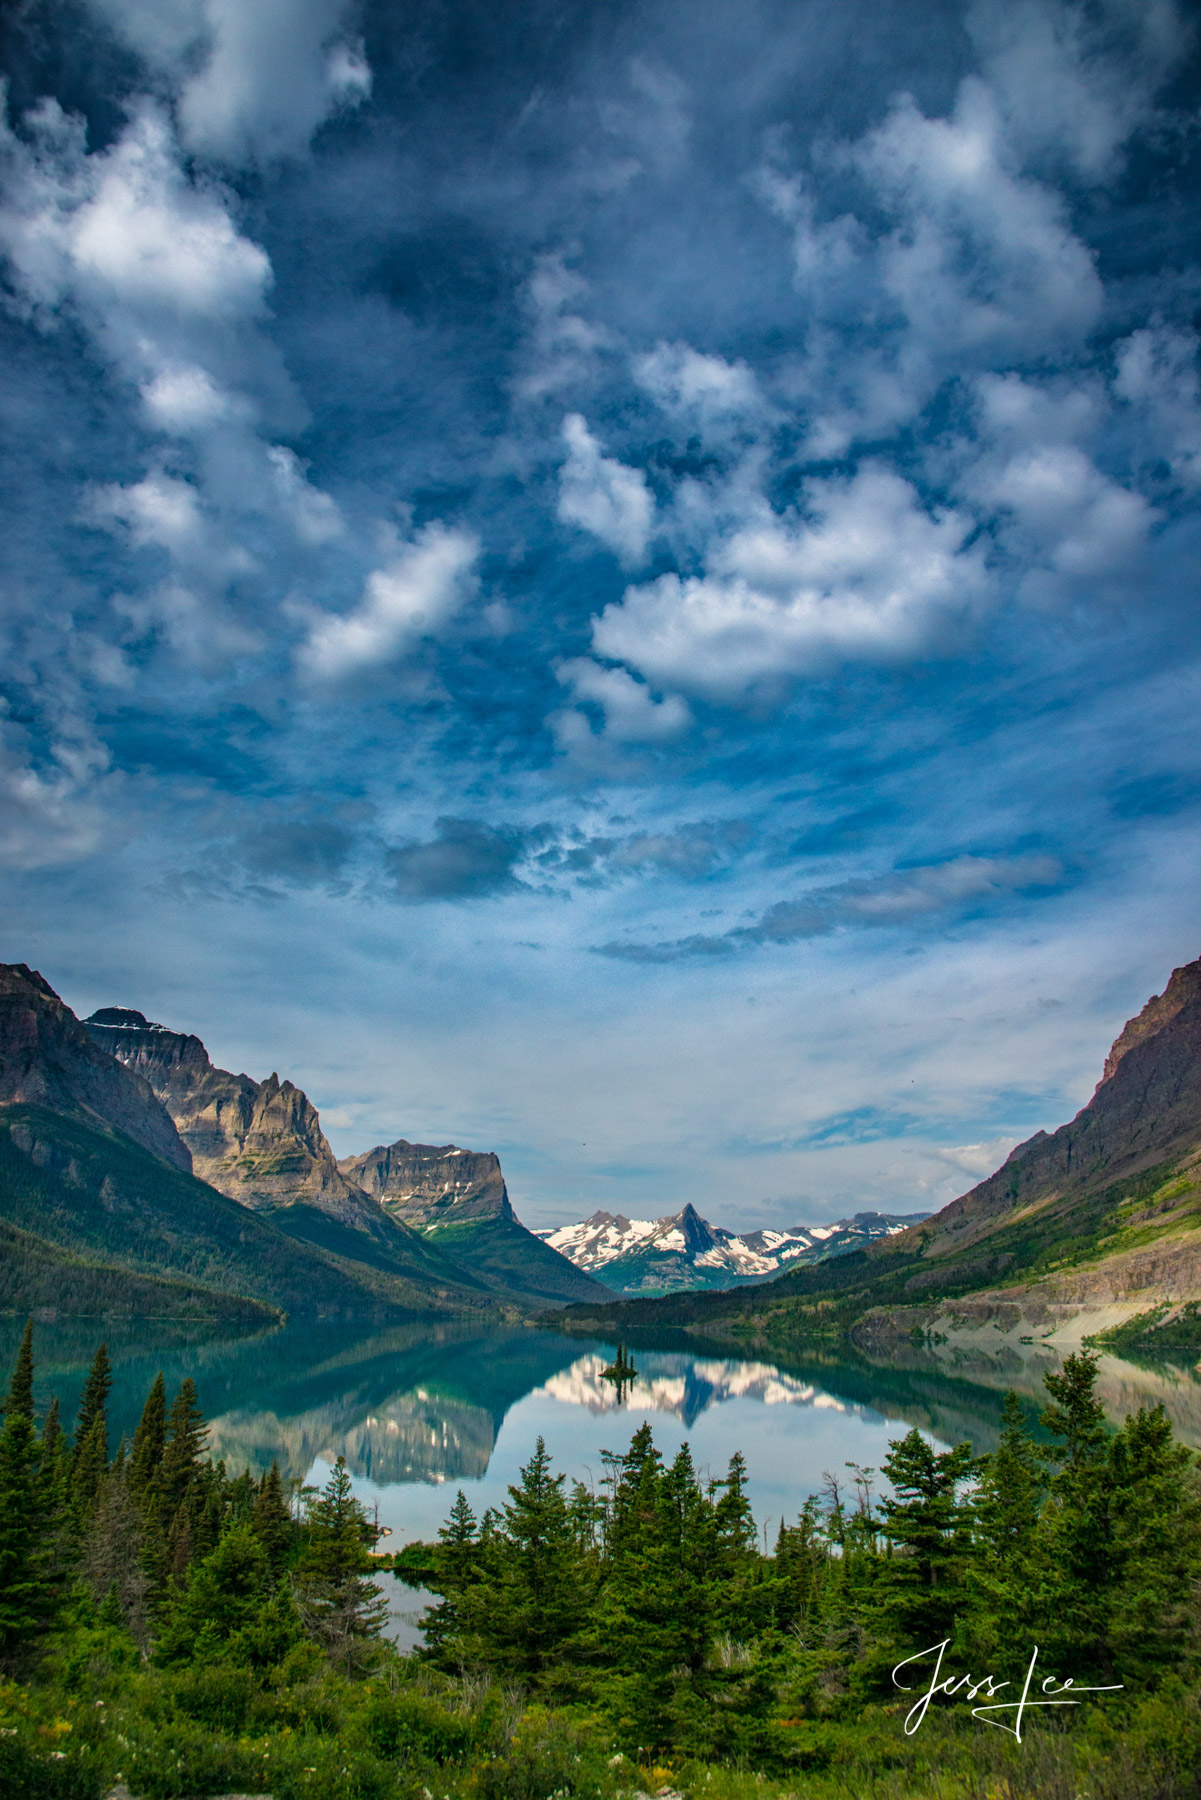 Limited Edition of 50 Exclusive high-resolution Museum Quality Fine Art Prints of Glacier National Park  Vertical Landscapes....